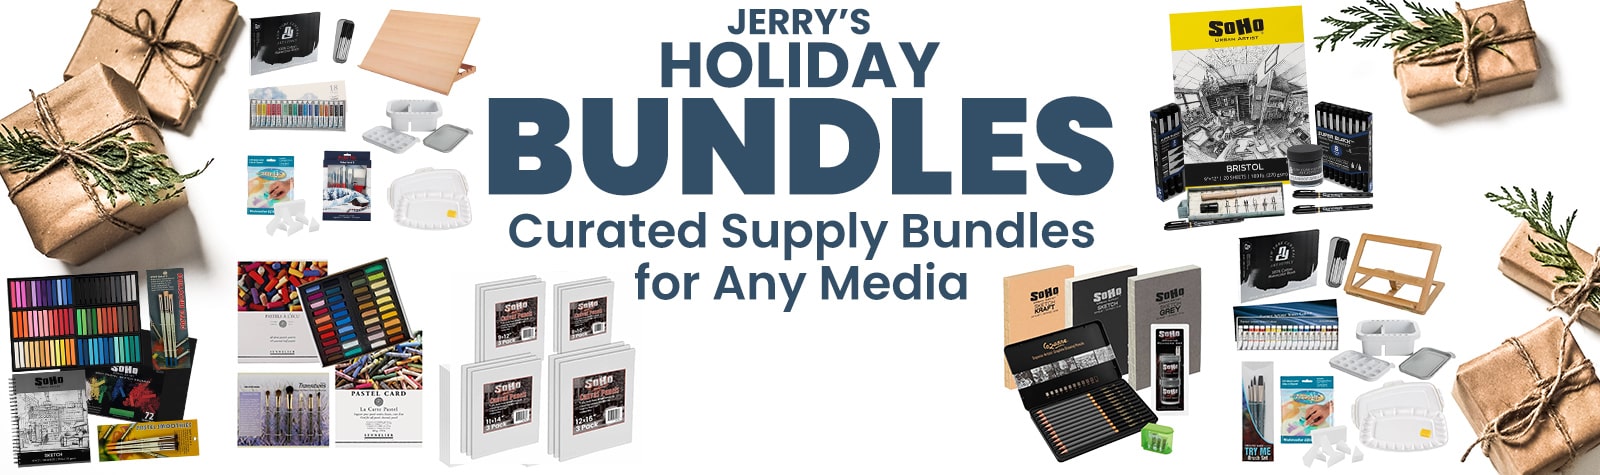 Jerry's Holiday Bundles - Special Curated Supplies for Any Media